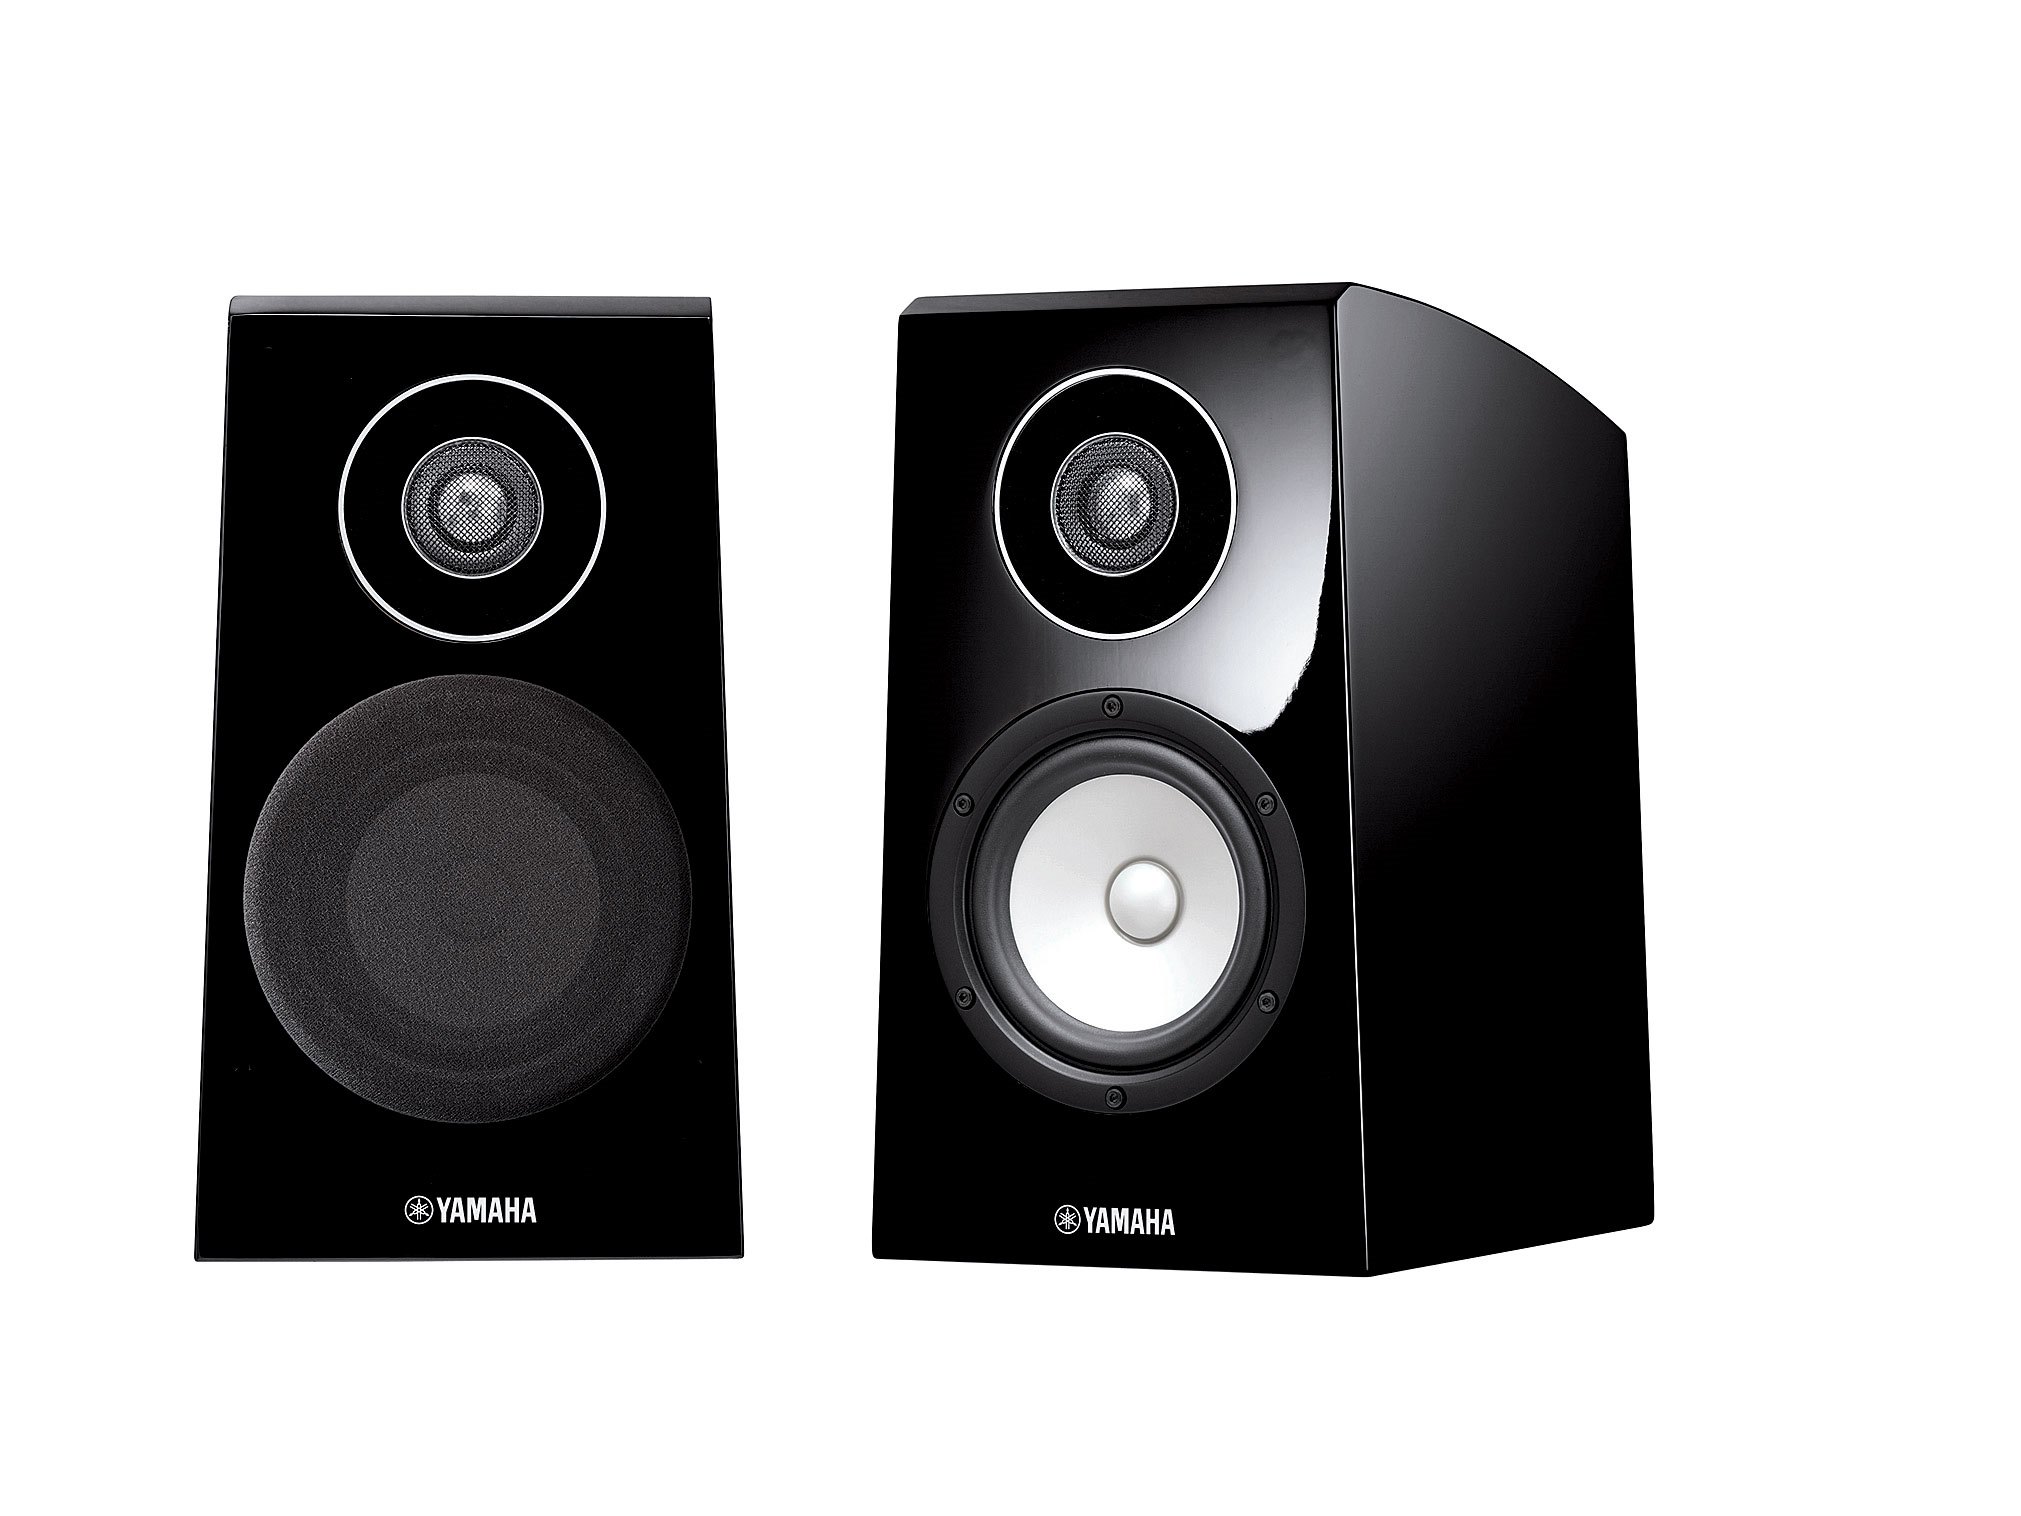 NS-B750 - Overview - Speaker Systems - Audio & Visual - Products